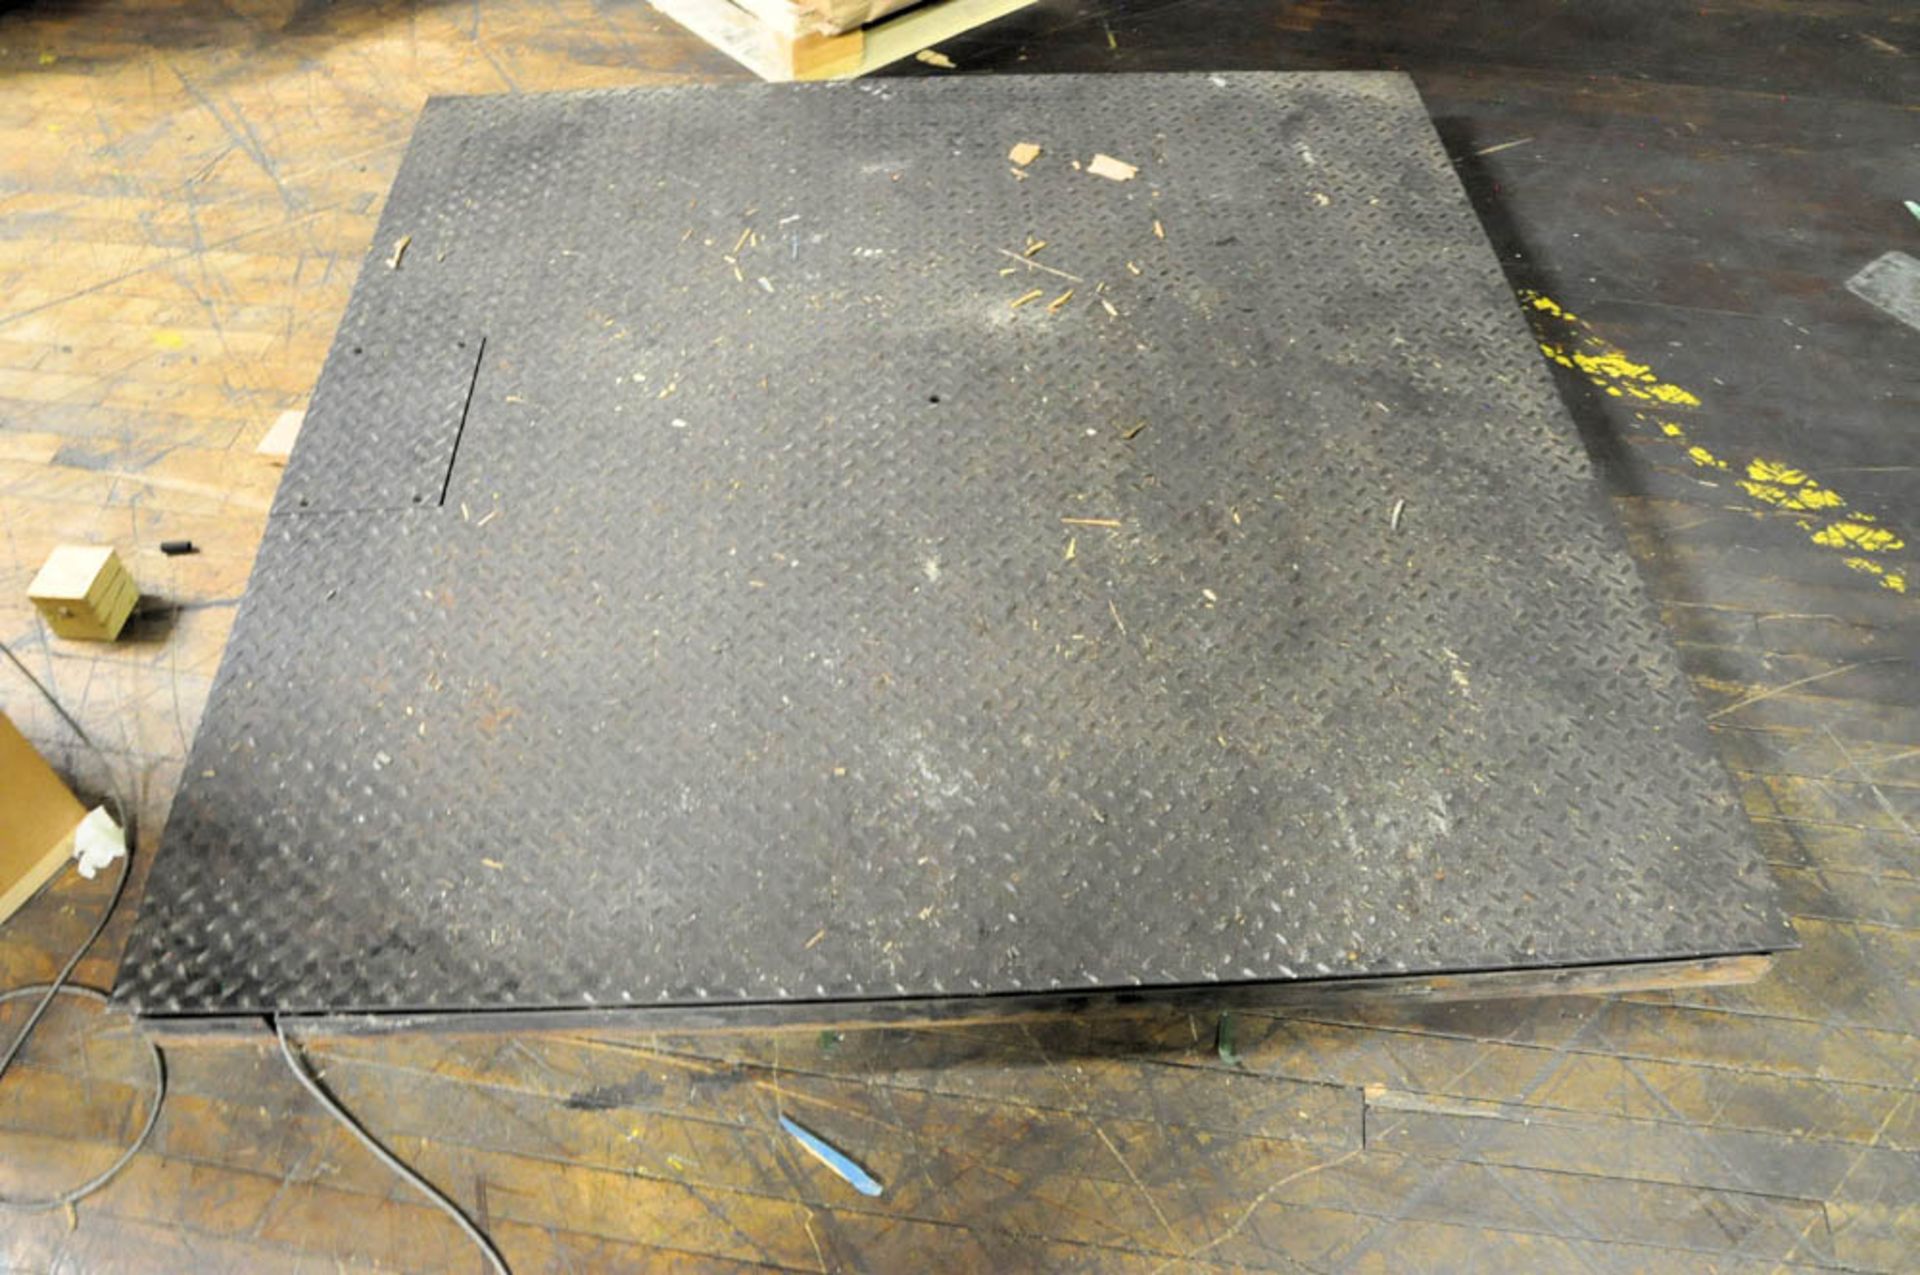 60" X 60" ABOVE GROUND FLOOR PLATE, WITH AVERY WEIGH TRONIX PC 905 SCALE HEAD - Image 3 of 3